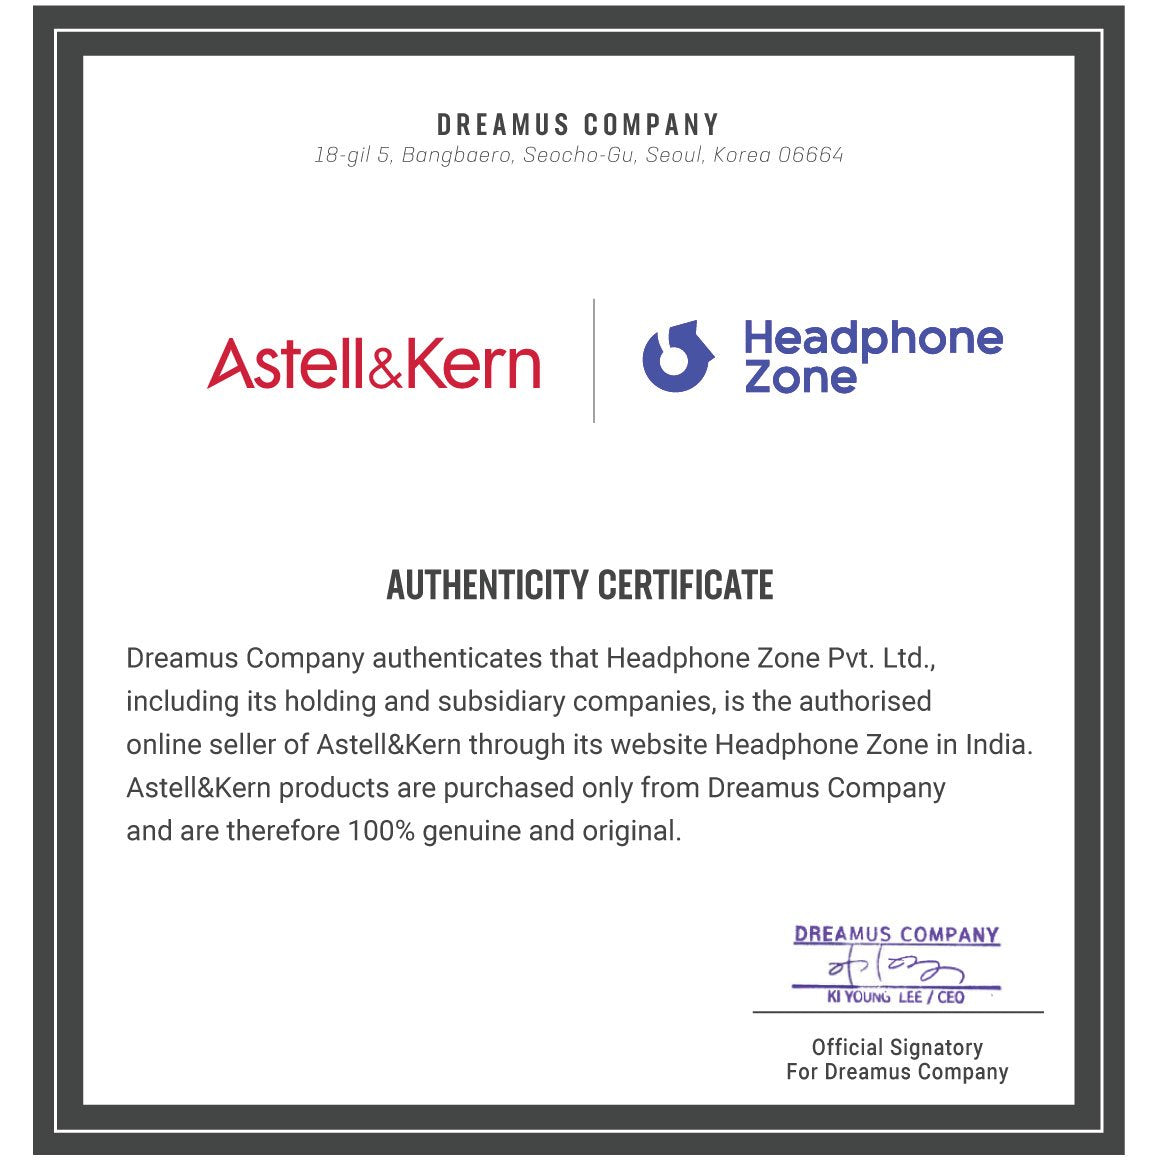 Headphone-Zone-Astell&Kern-Authenticity-Certificate